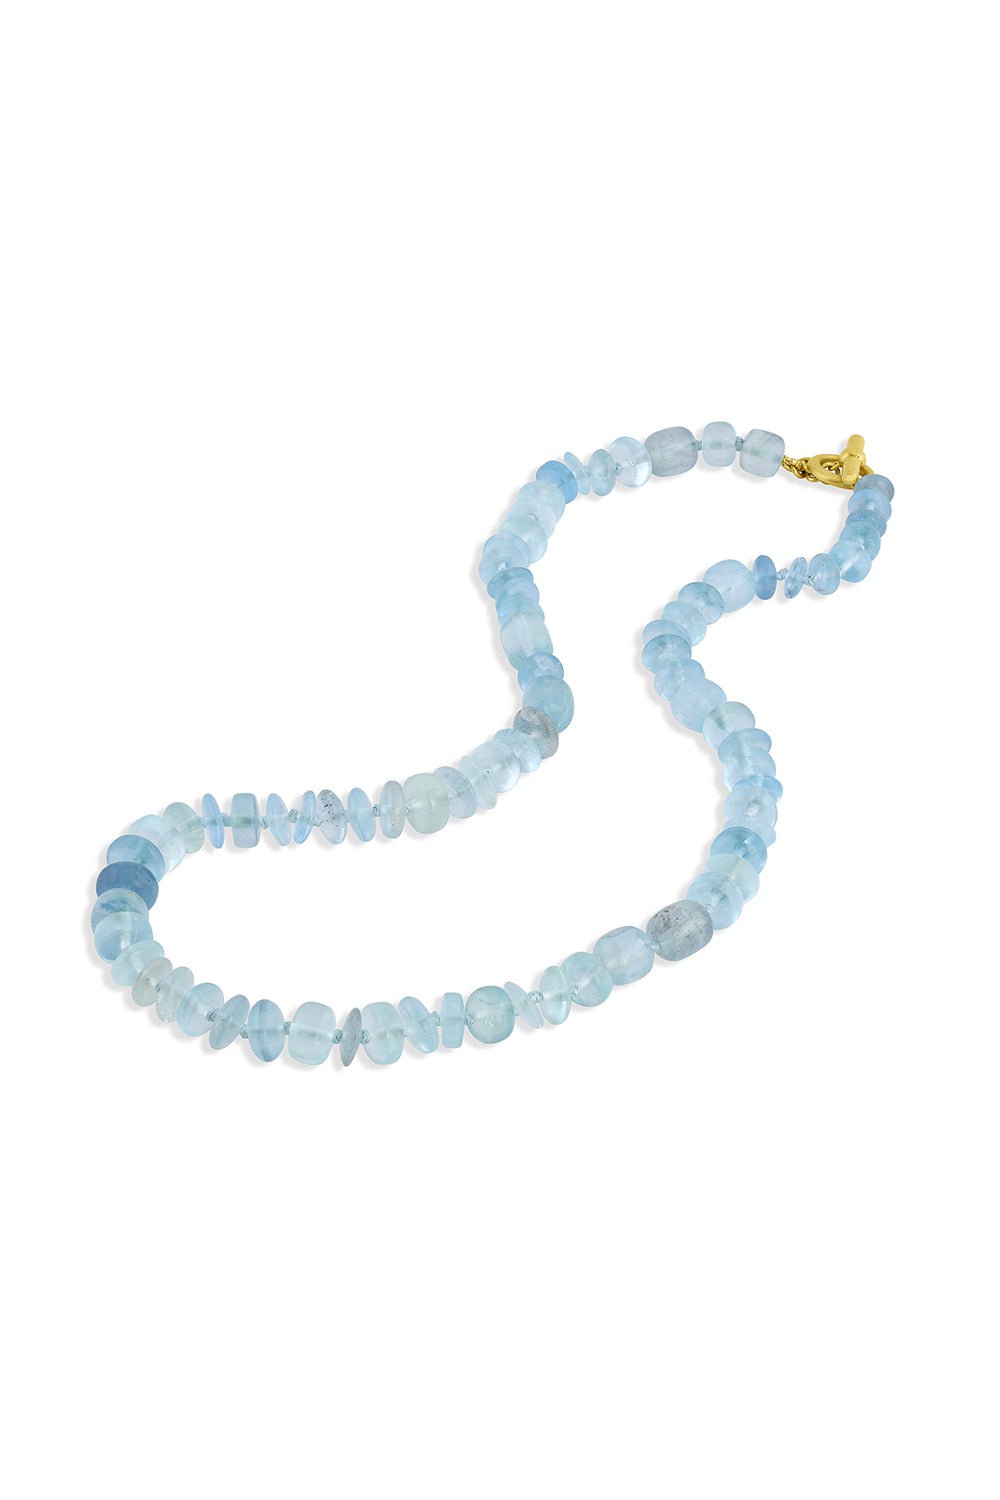 LEIGH MAXWELL-Aquamarine Beaded Necklace-YELLOW GOLD